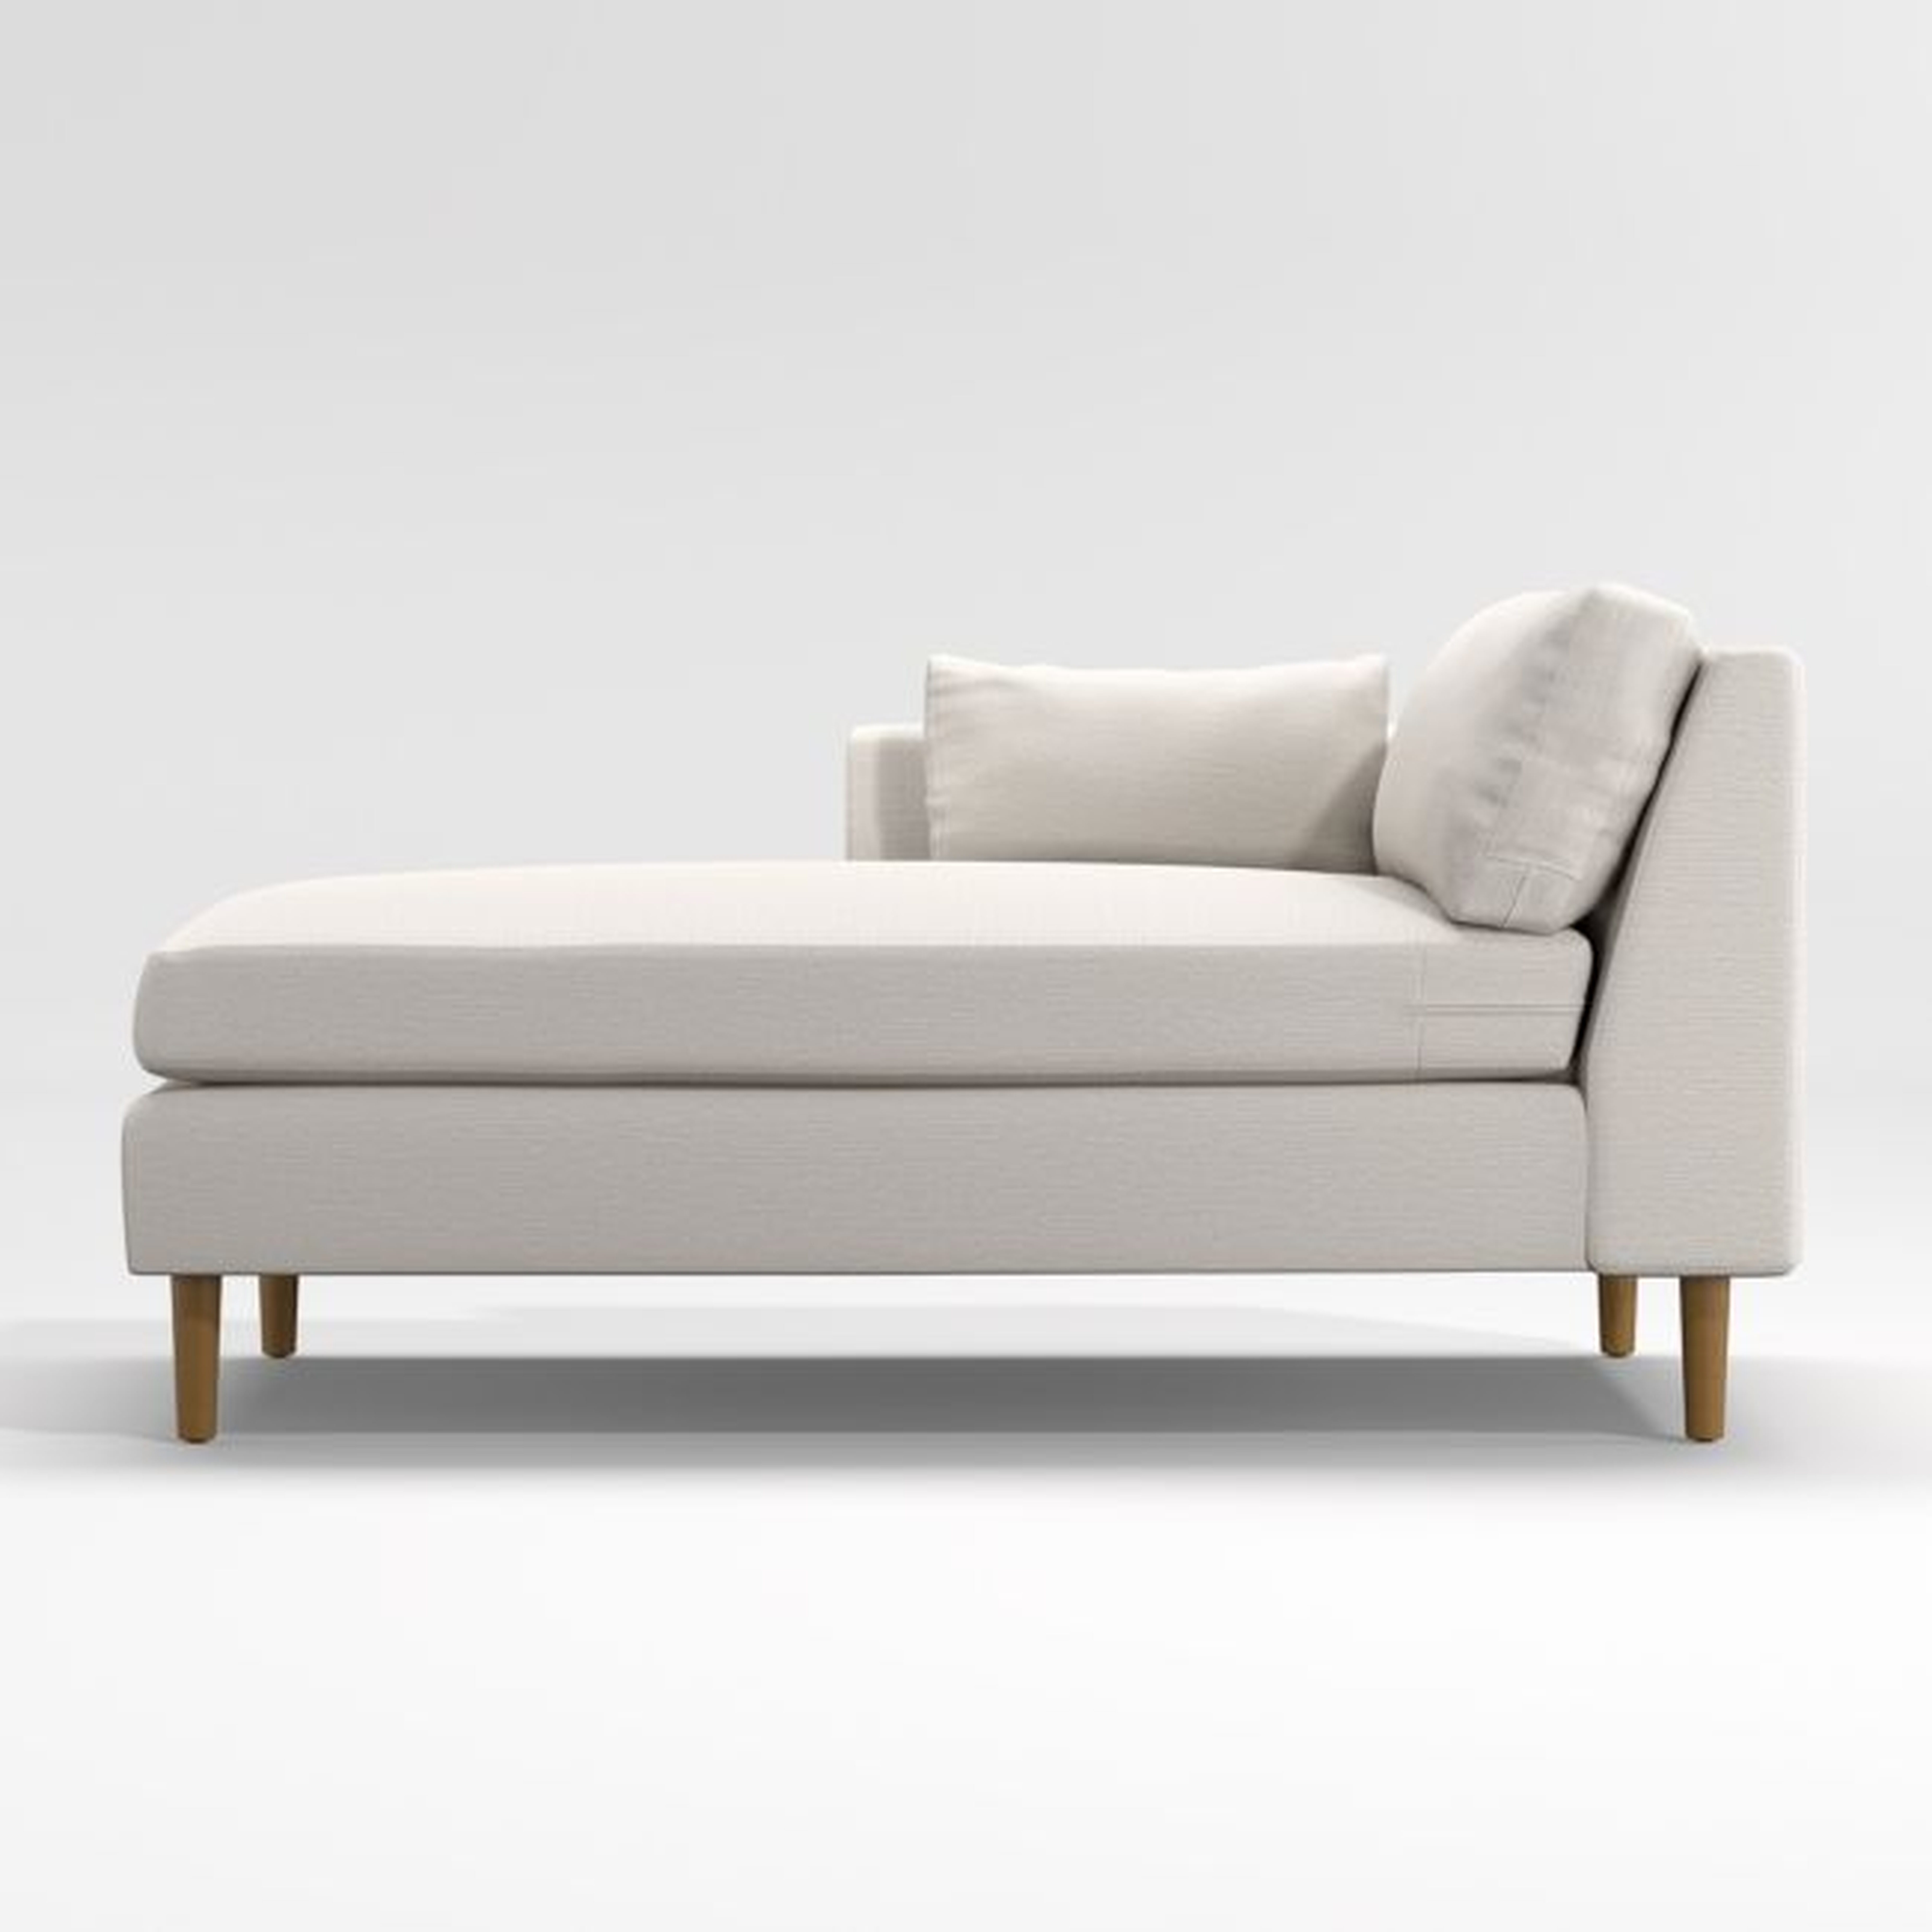 Avondale Wood Leg Left-Arm Chaise - Crate and Barrel